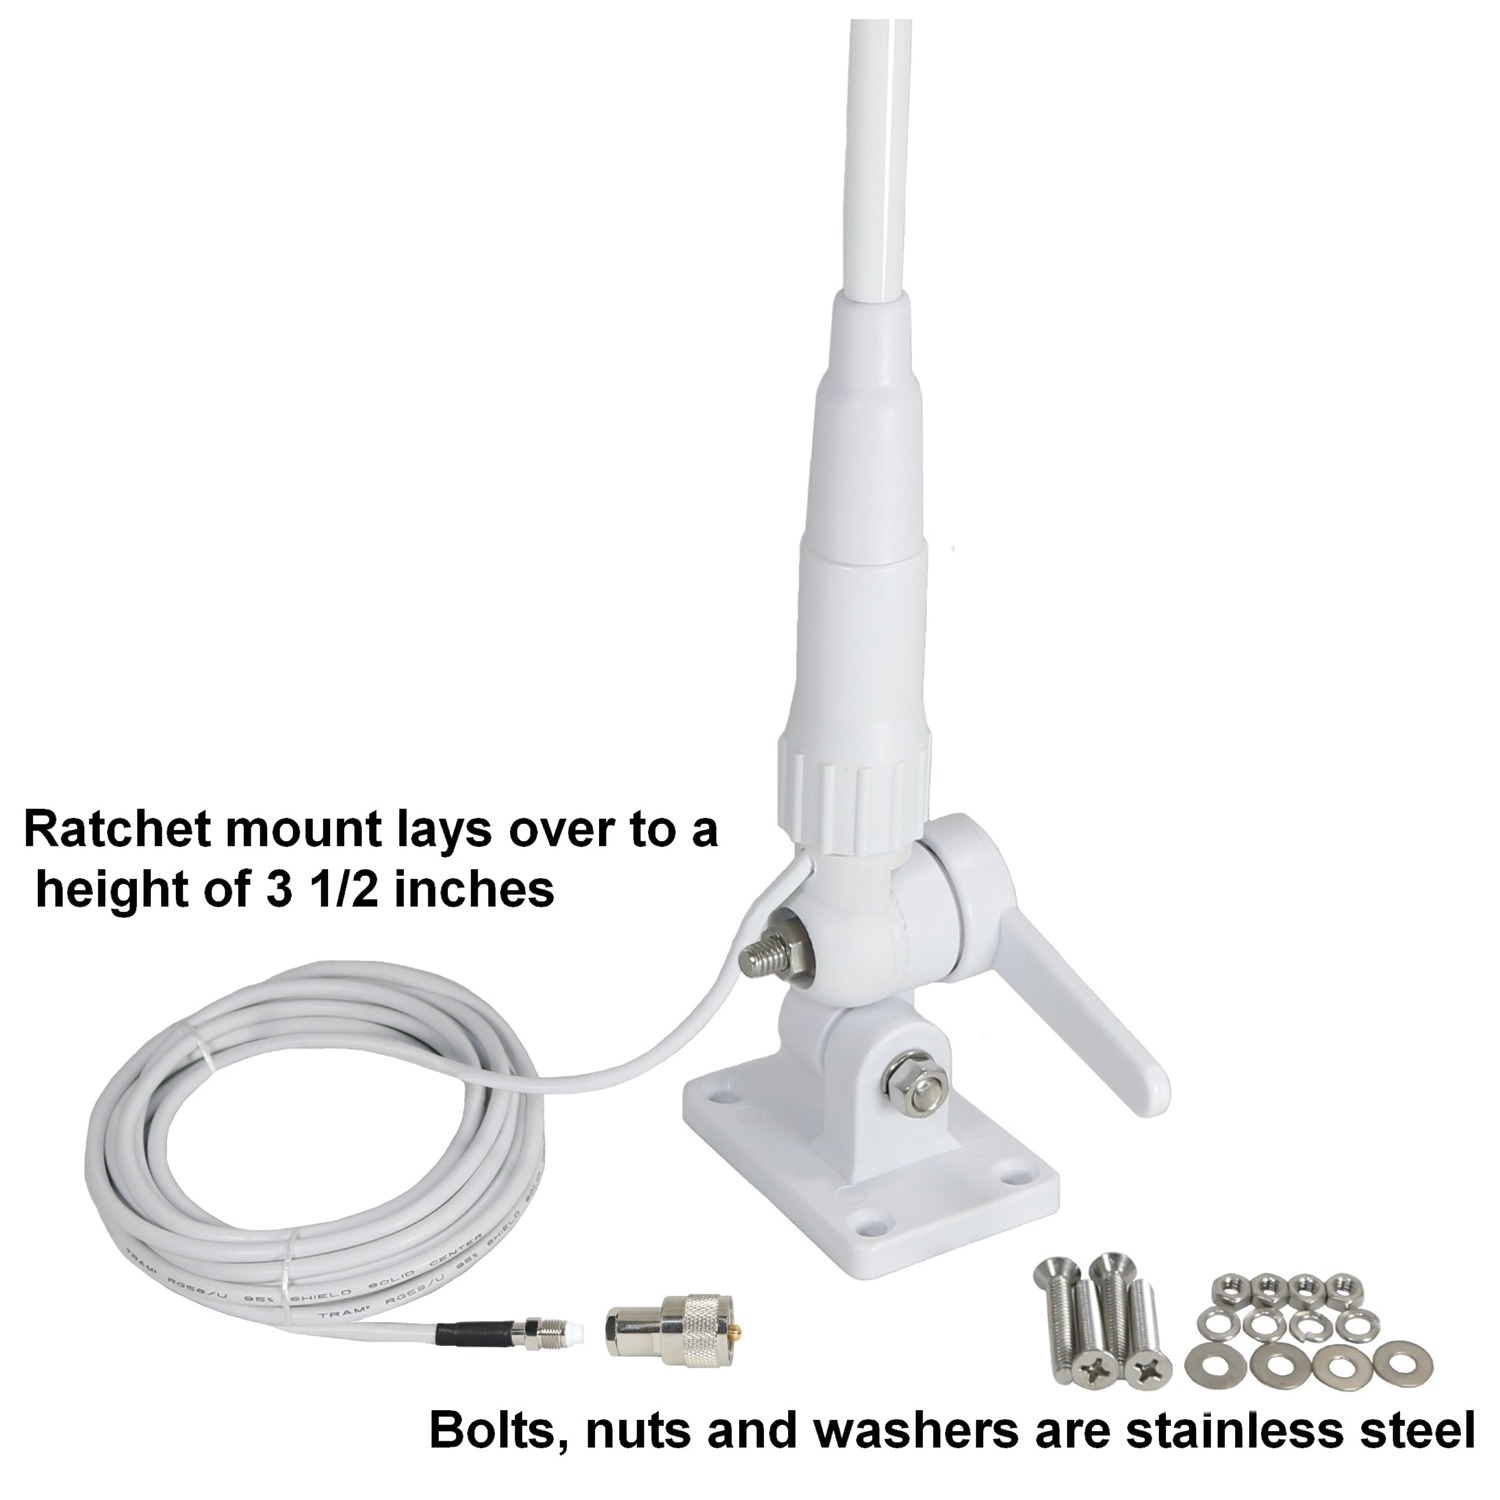 Tram 1616 5Ft VHF 3DBD Gain Marine Antenna With Cable Built-In To Ratchet Mount - image 5 of 5